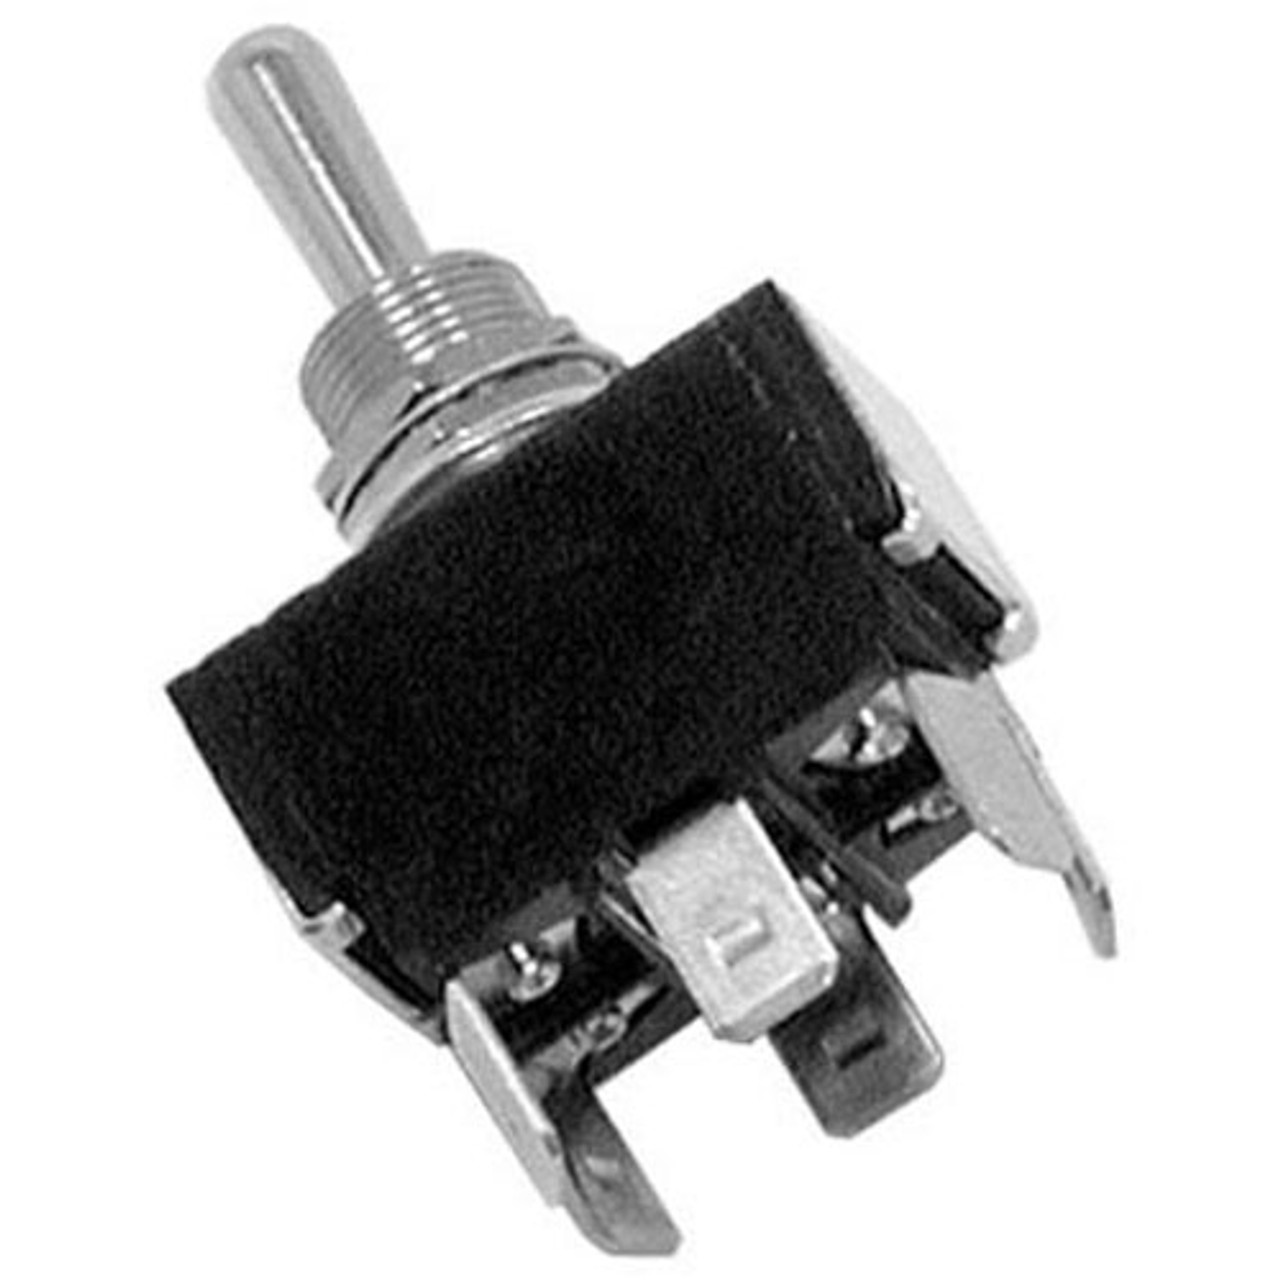 3 Position Switch 7/16 Dpdt - Replacement Part For Globe 952-8